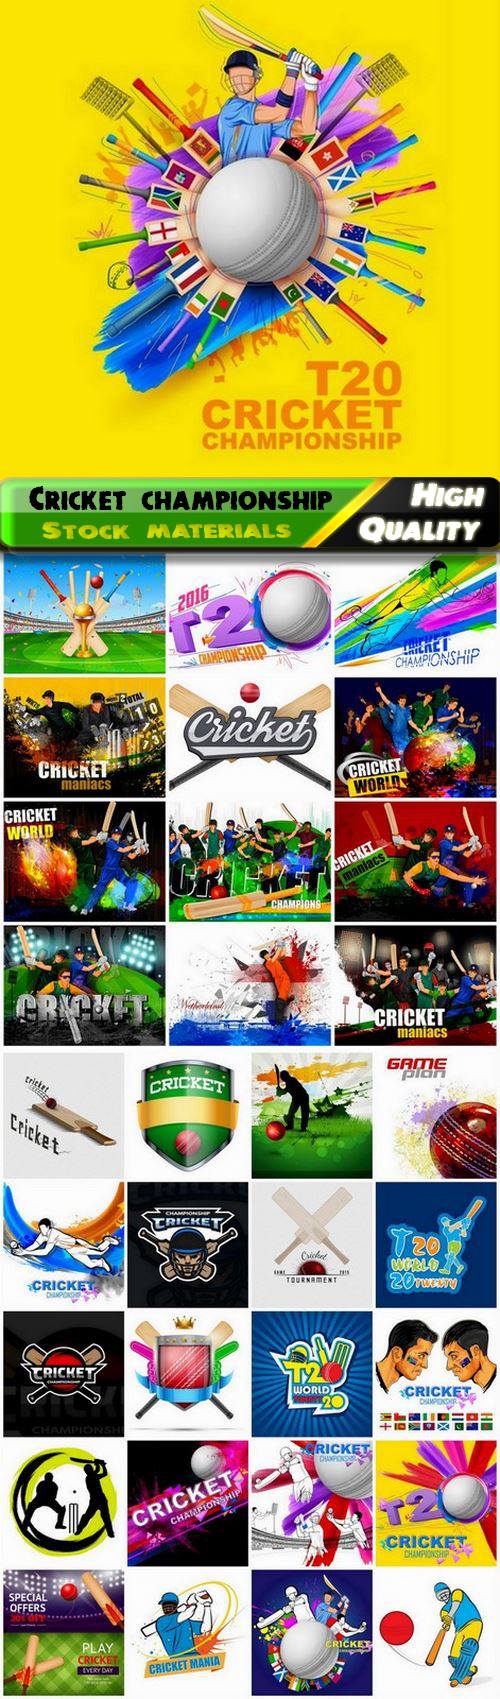 Cricket championship 2016 and sport equipment - 39 Eps